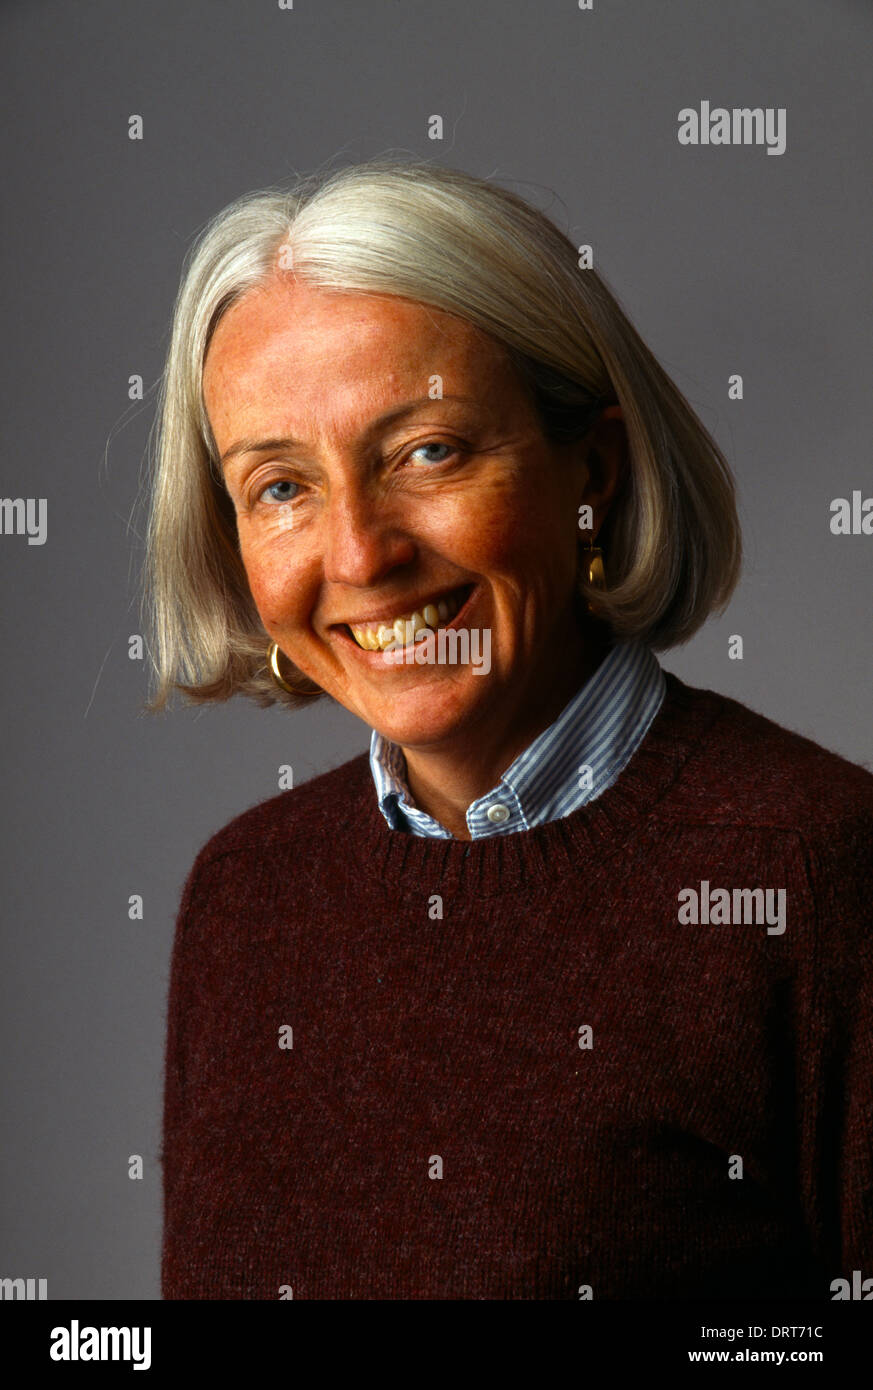 California USA Portrait Of A 60 Year Old Woman With Grey Hair